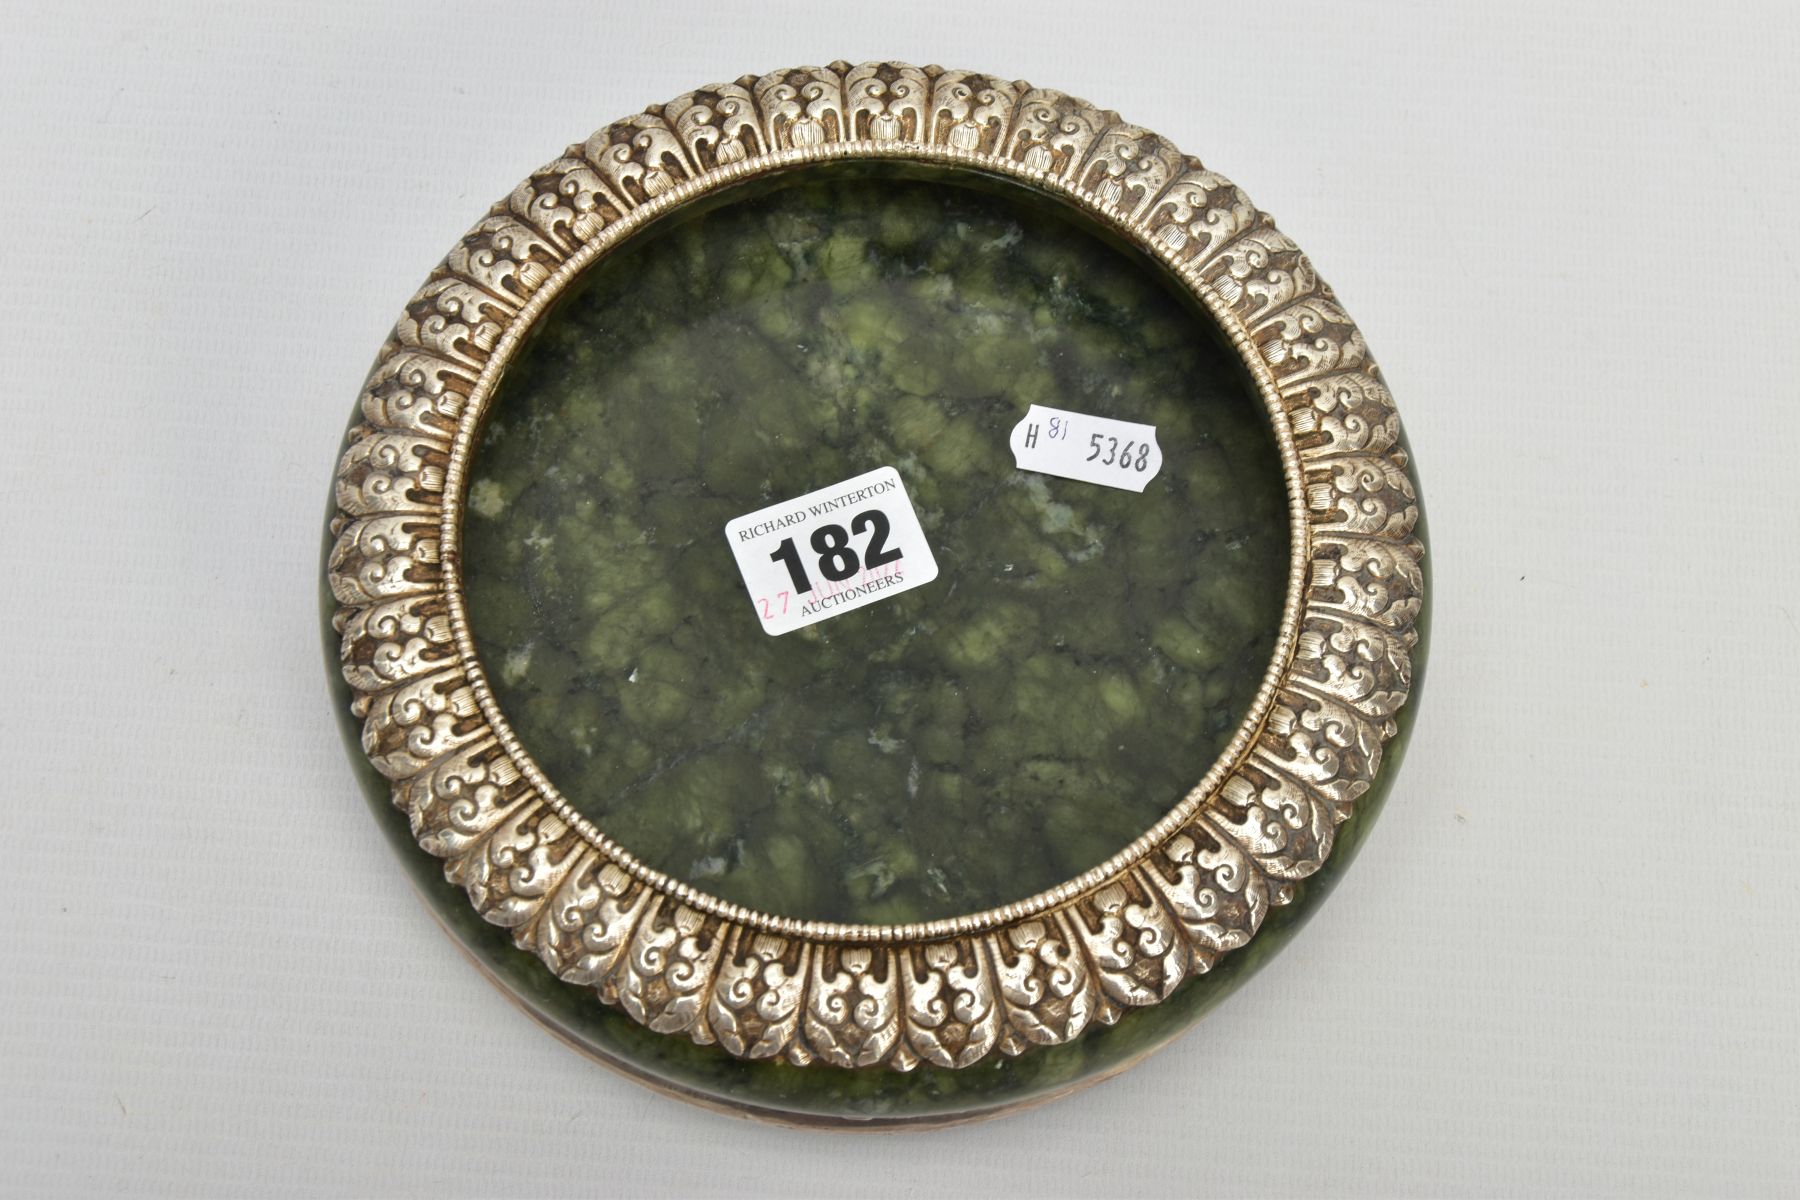 A WHITE METAL JADE BOWL AND STAND, believed to be 'Serpentine Jade,' with a white metal decorative - Bild 2 aus 5